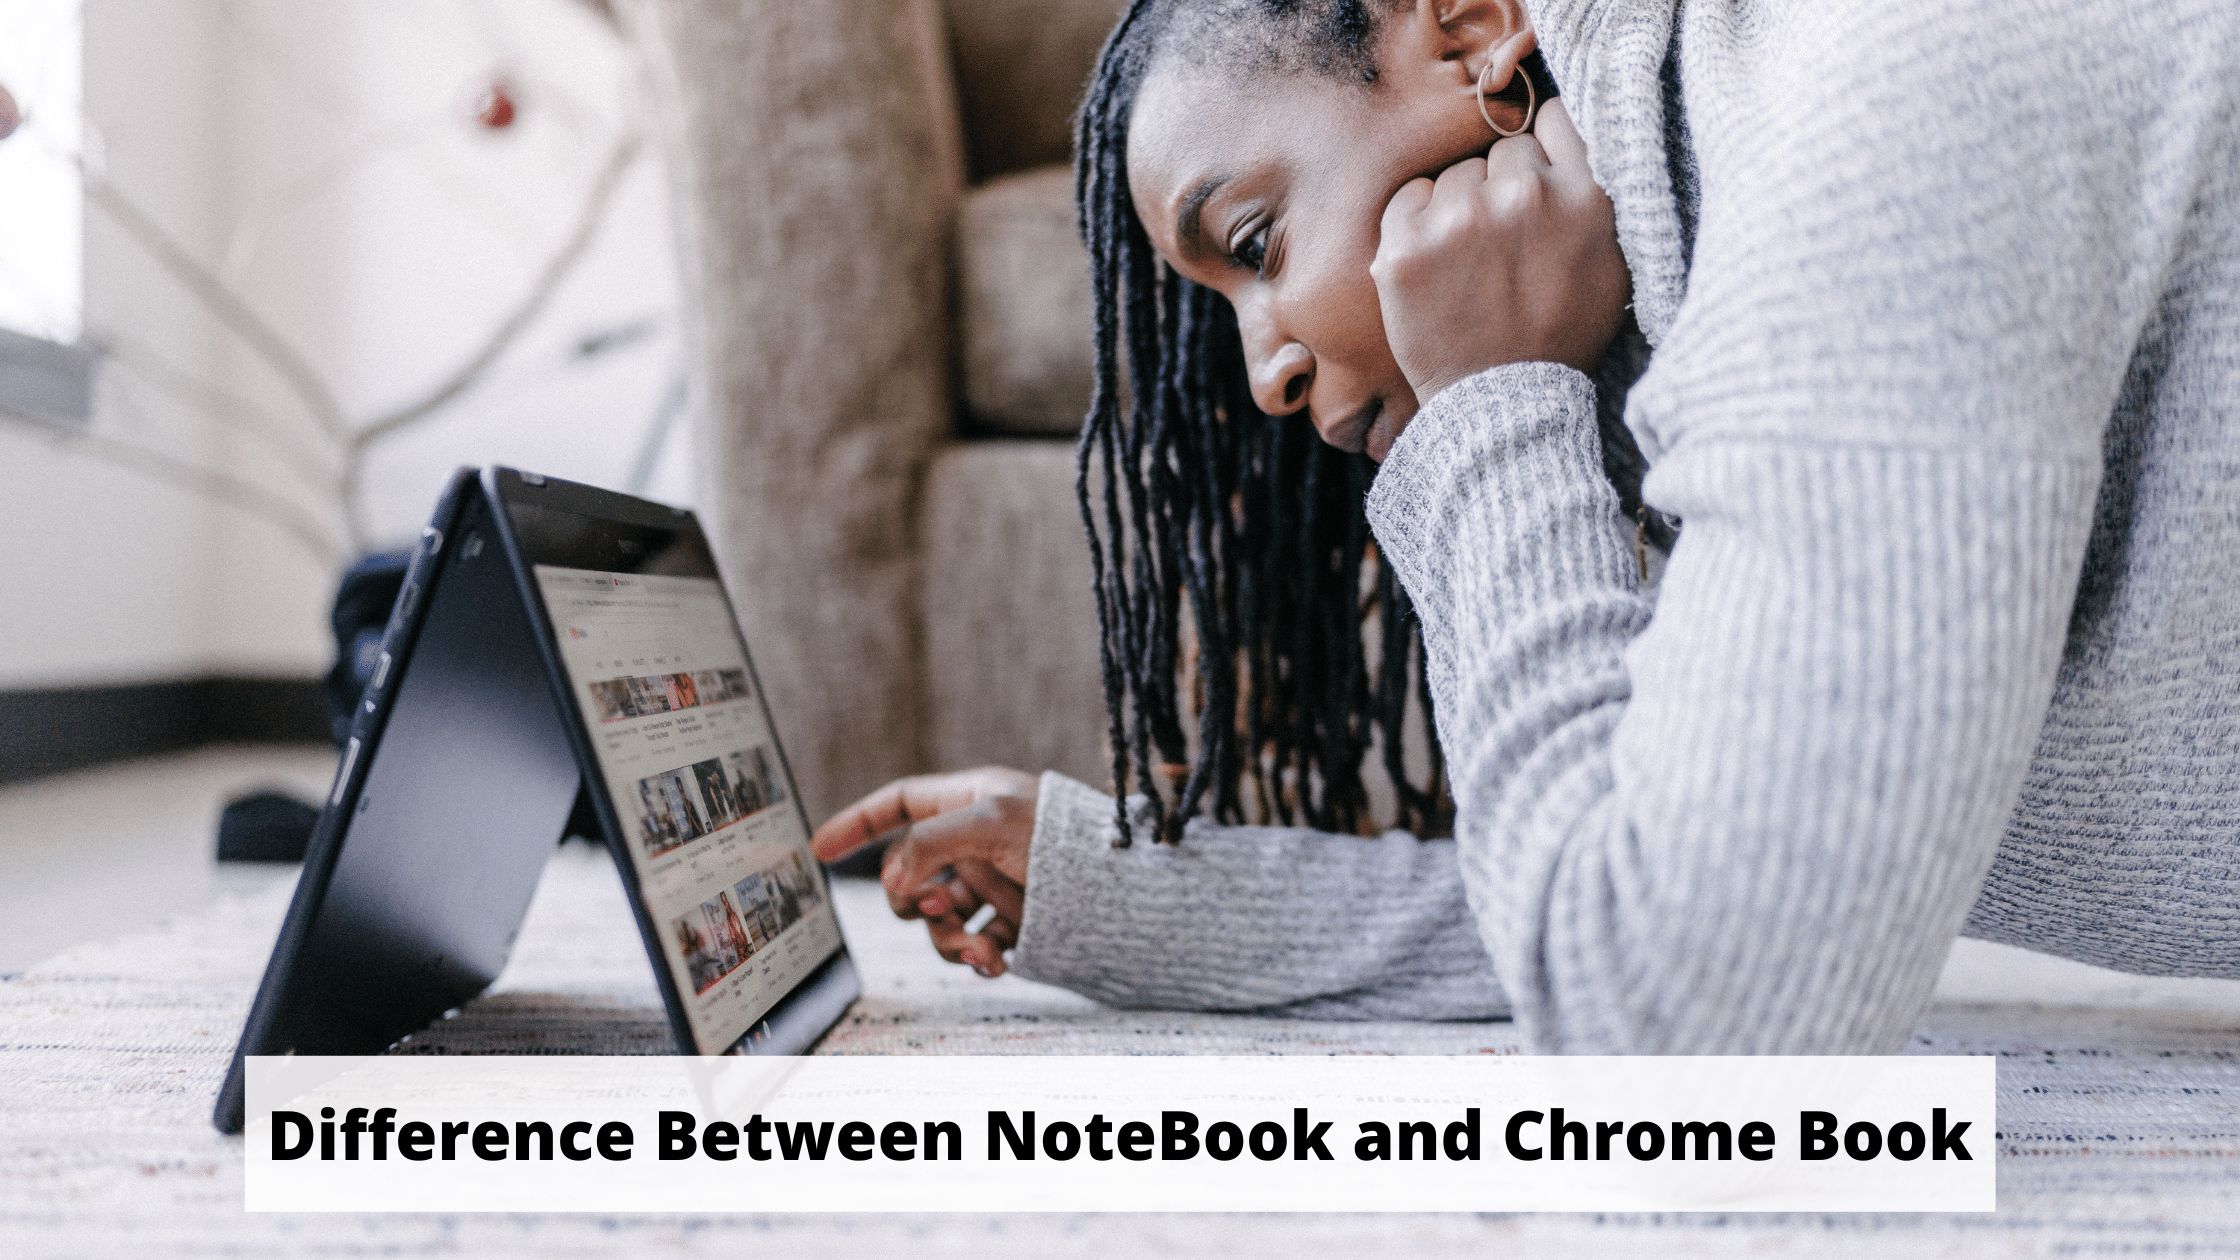 Difference Between NoteBook and Chrome Book?